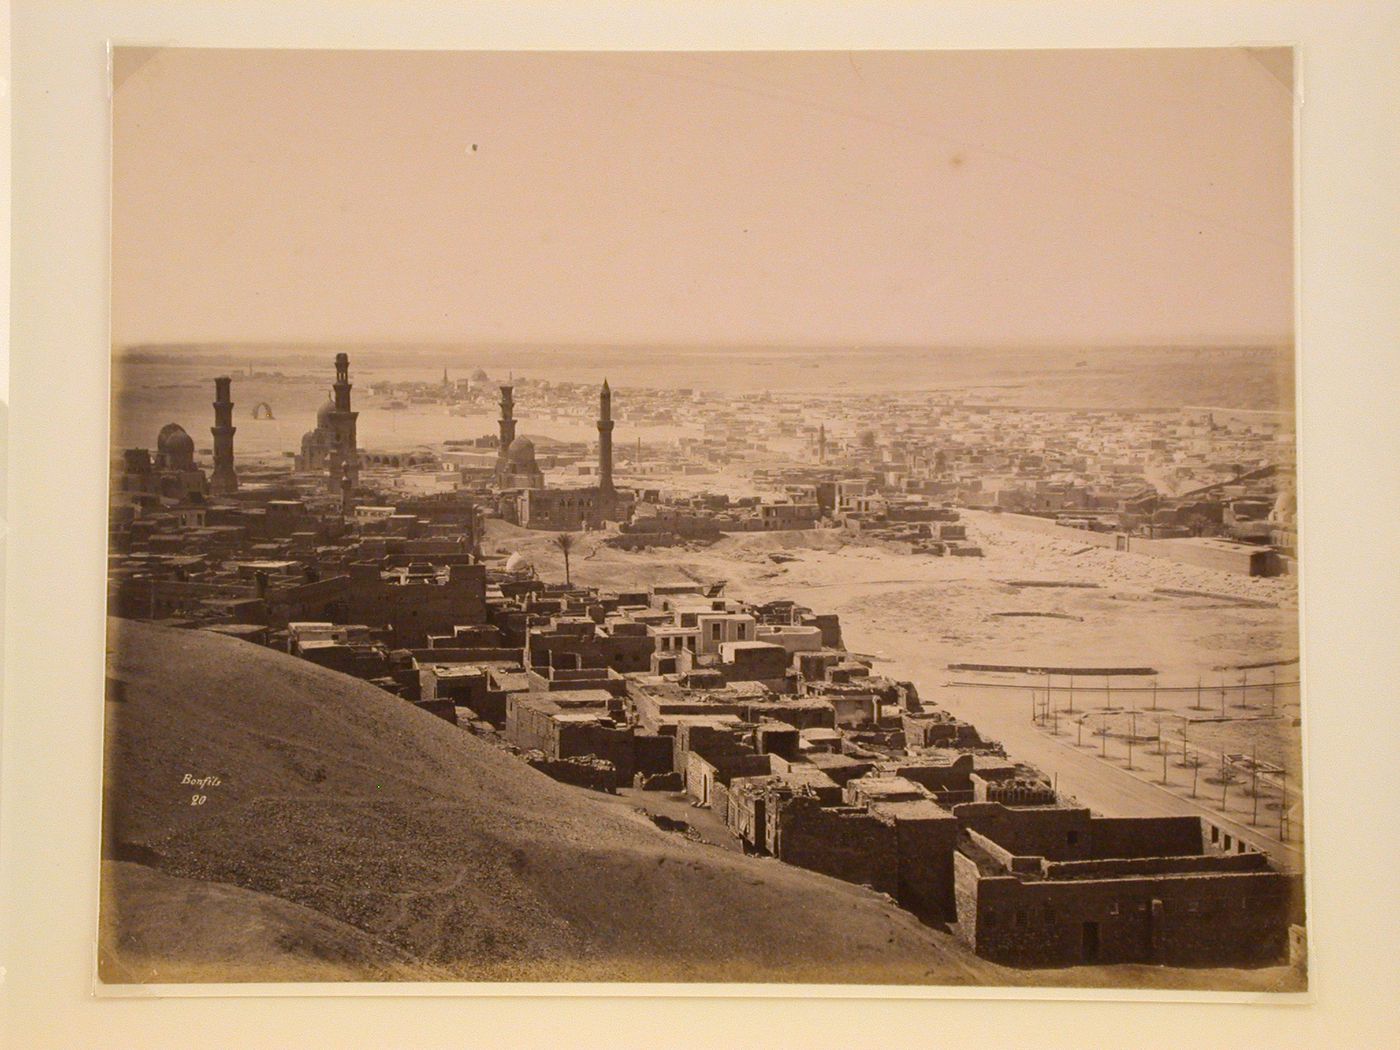 General view of Tombs of the Mamlukes and surrounding city of Cairo, Egypt